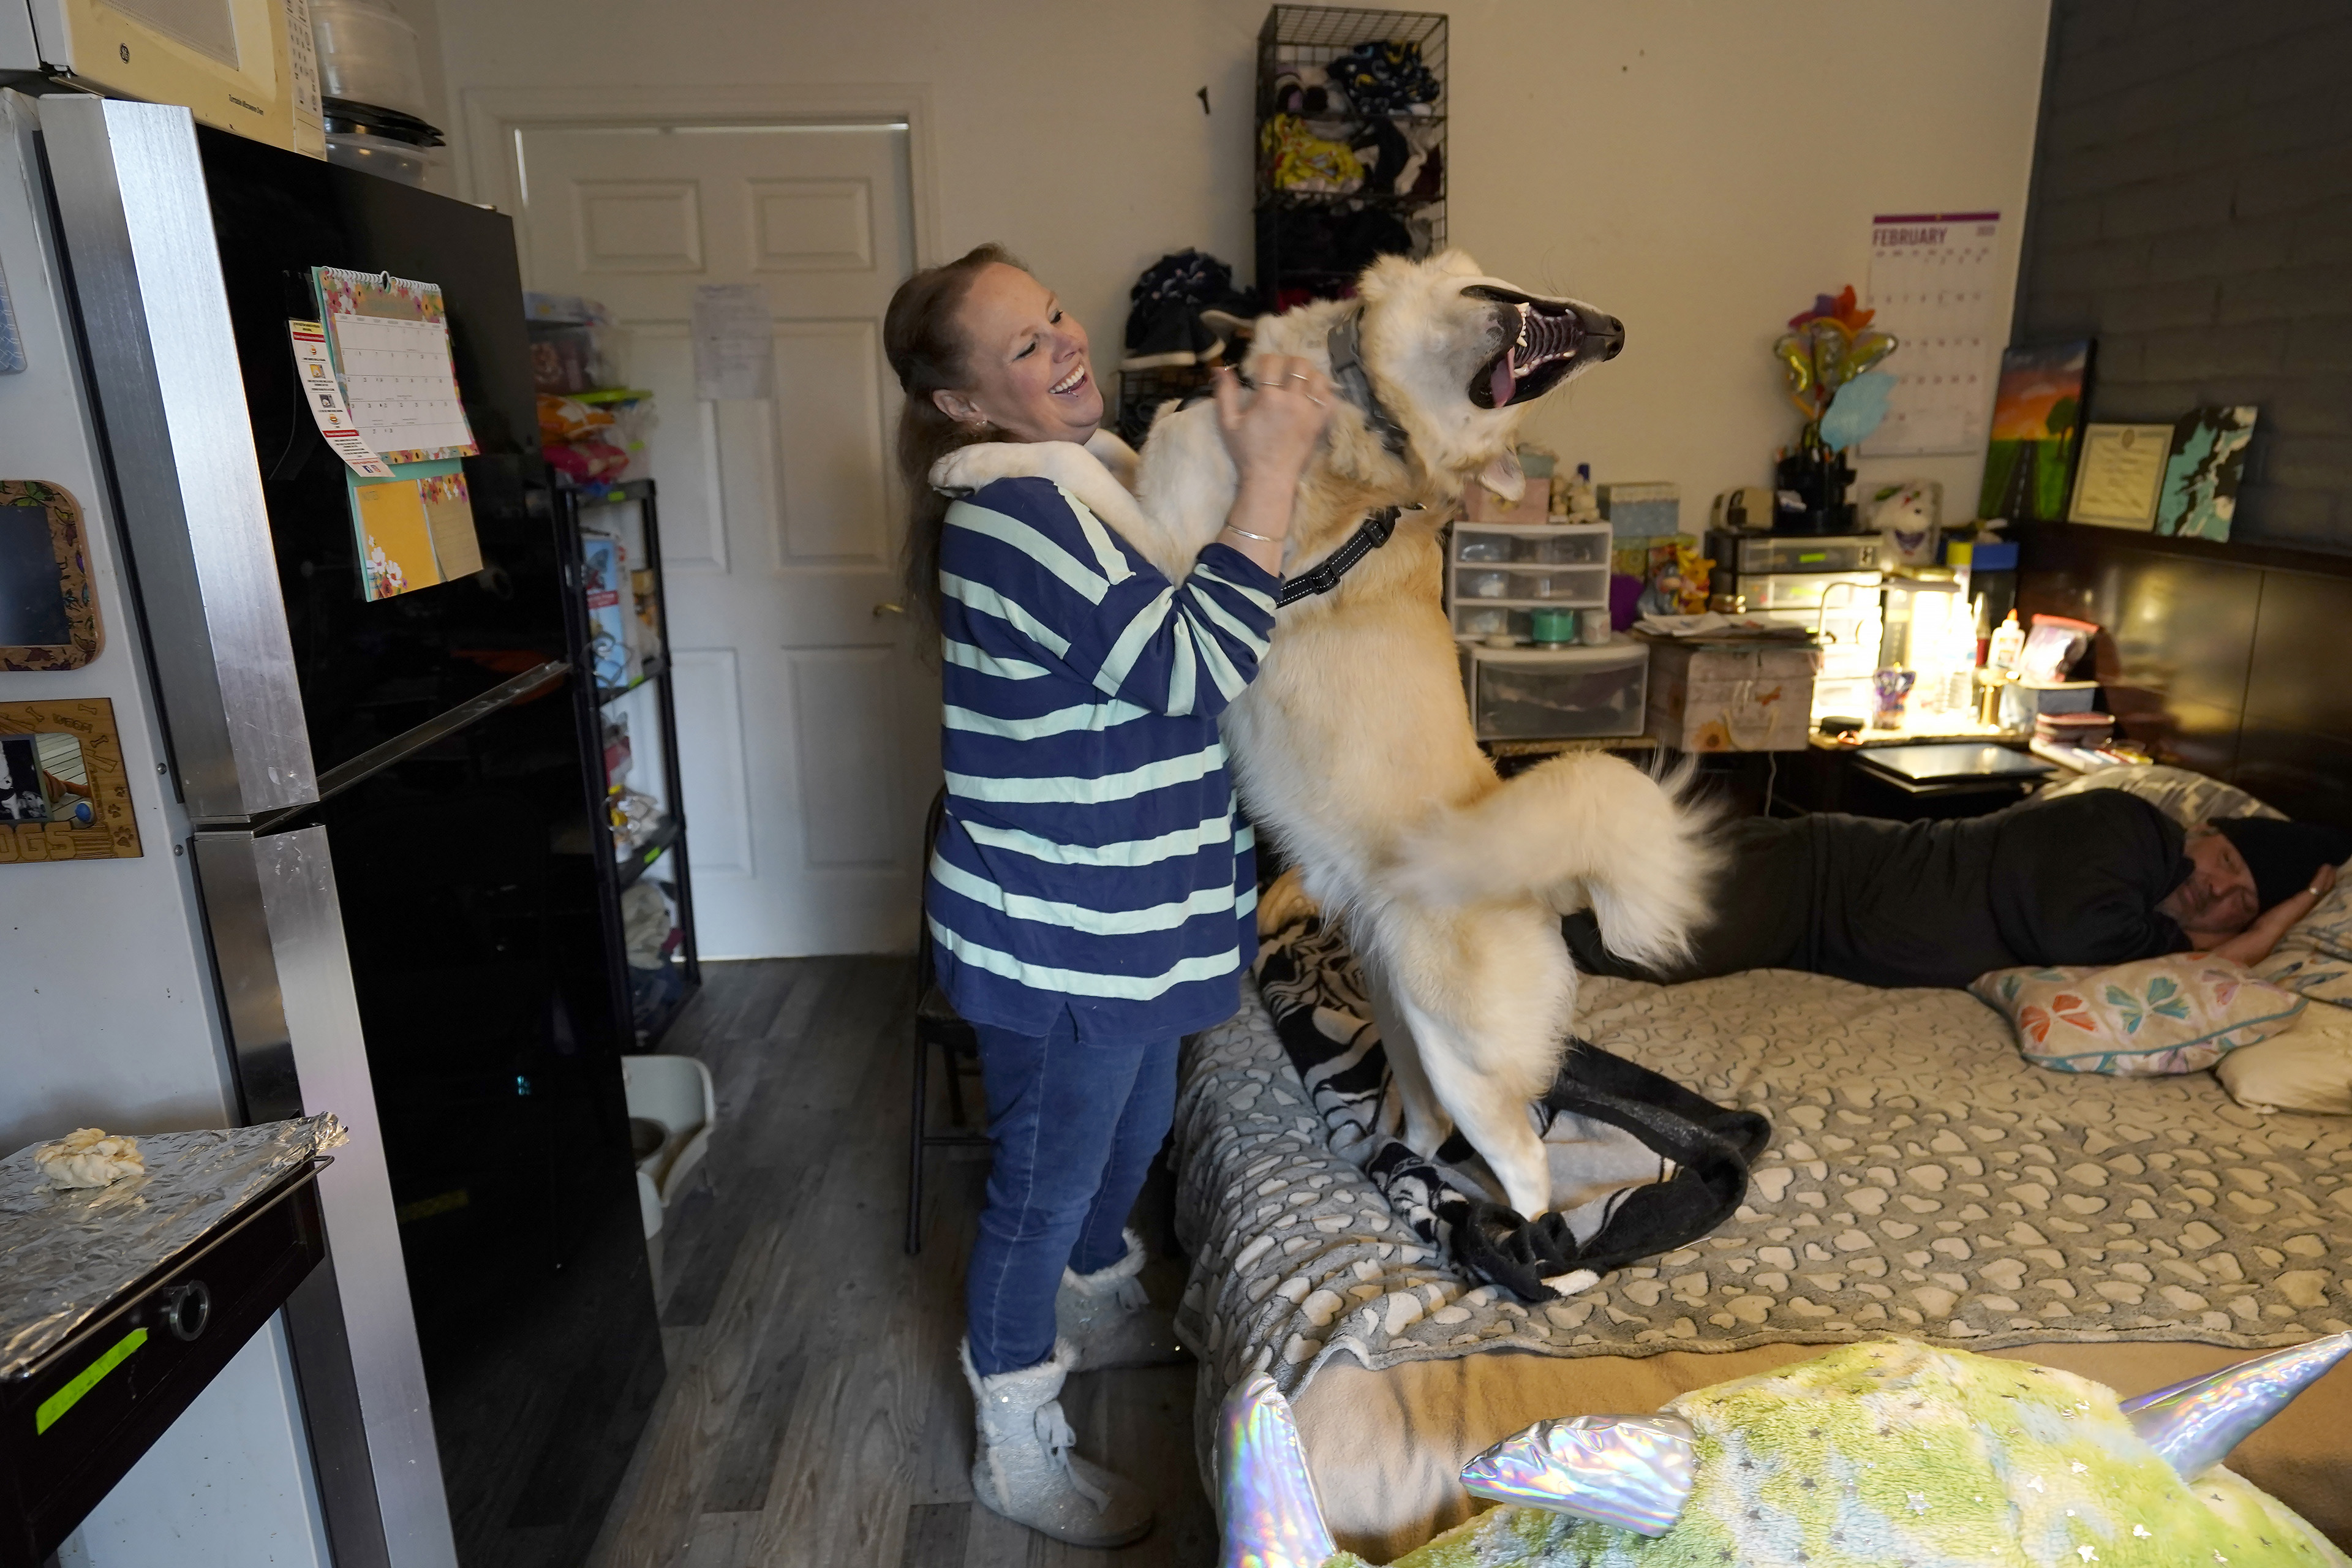 Stephanie Lammers pets her dog, who is standing on its hind legs with its front paws on her shoulders, visibly jubilant from the affection.